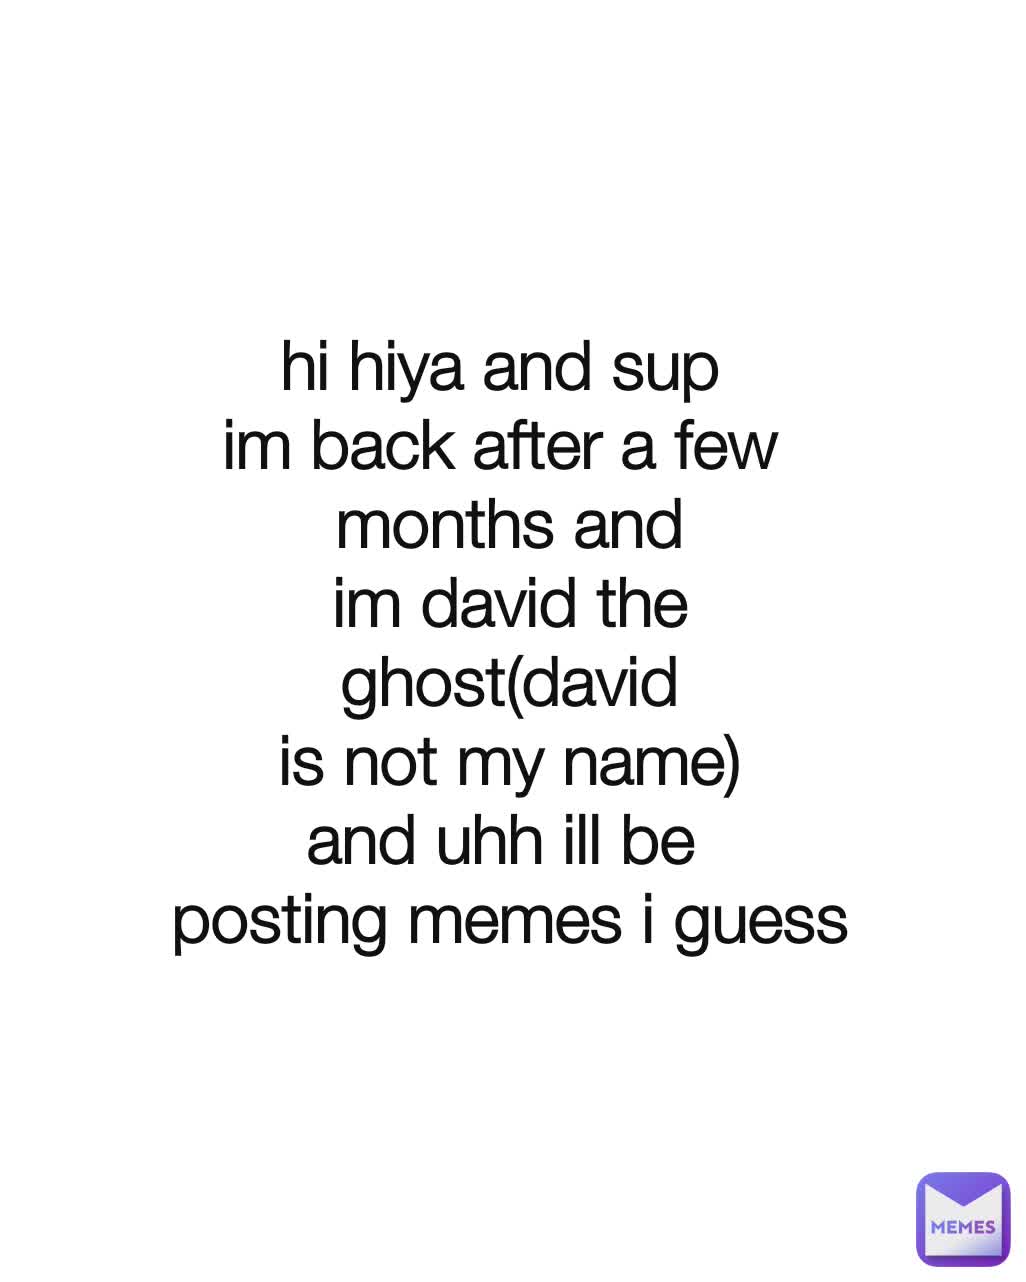 hi hiya and sup 
im back after a few 
months and
im david the
ghost(david
is not my name)
and uhh ill be 
posting memes i guess